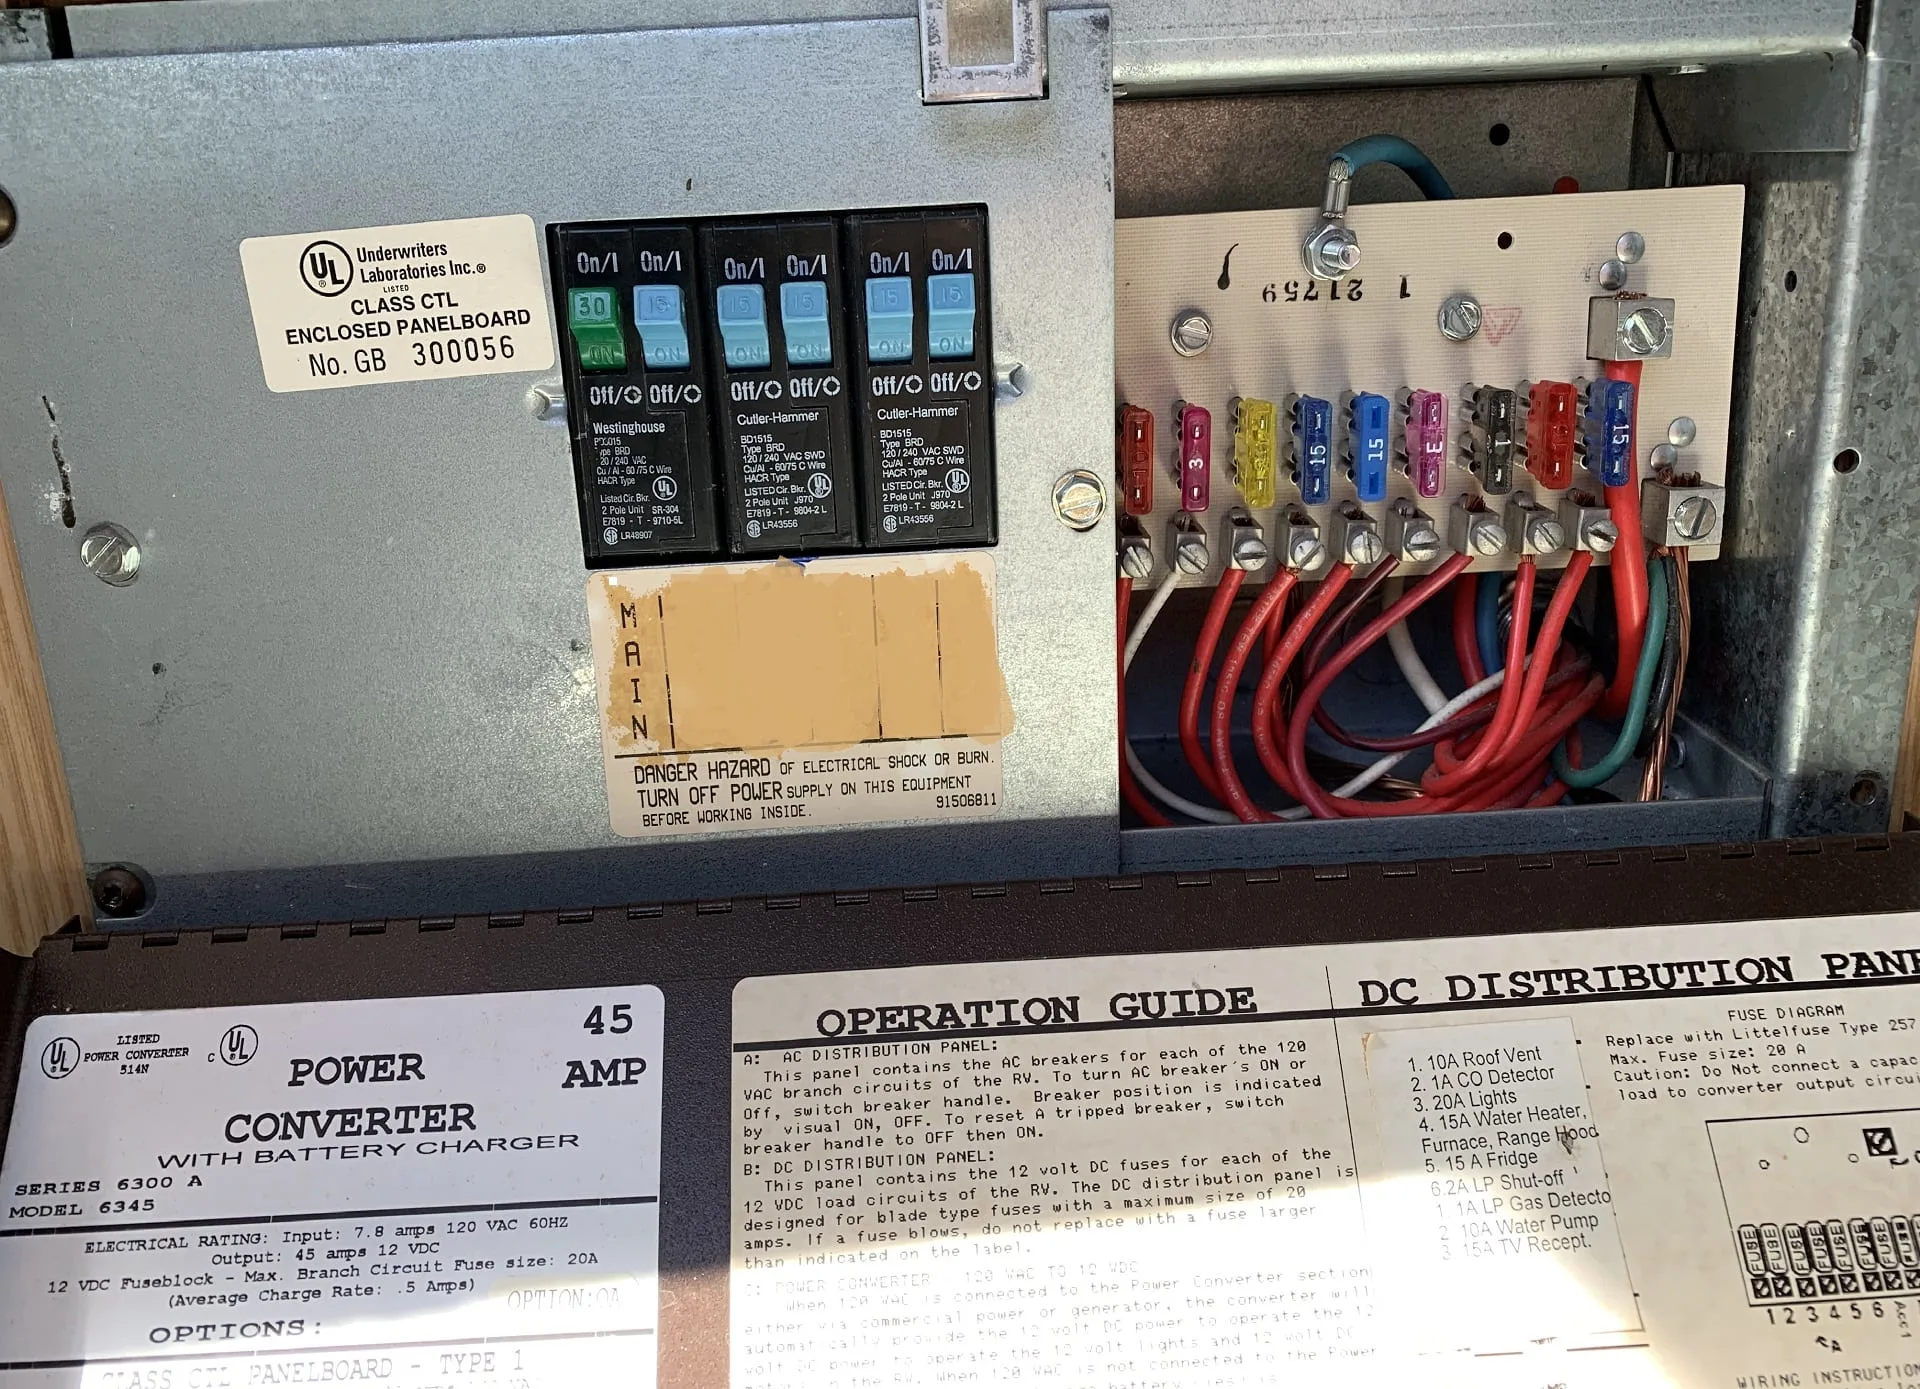 Photo of an older 2-stage RV converter charger